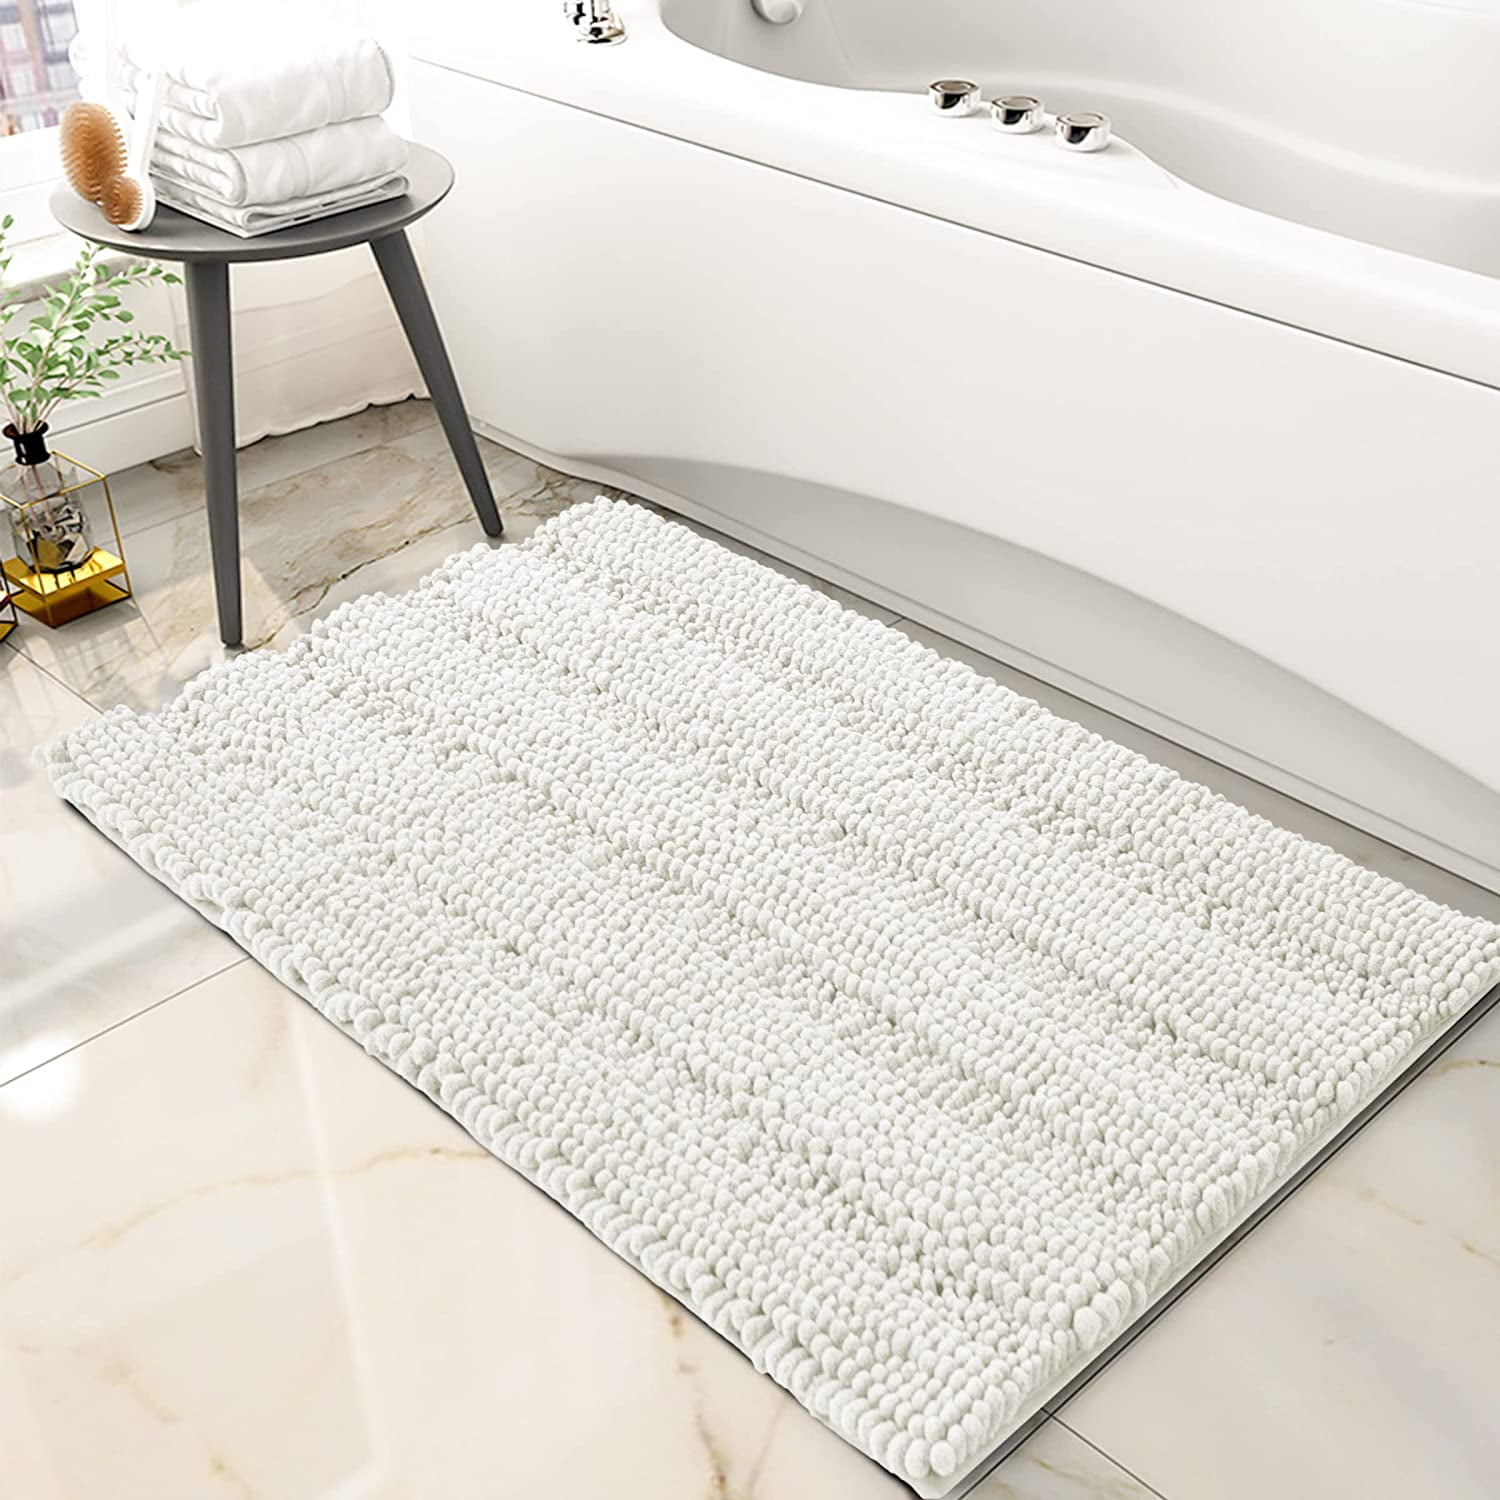 Lavish Home Memory Foam Striped Extra Long Bath Mat - Taupe - 24x60, 1 unit  - Dillons Food Stores